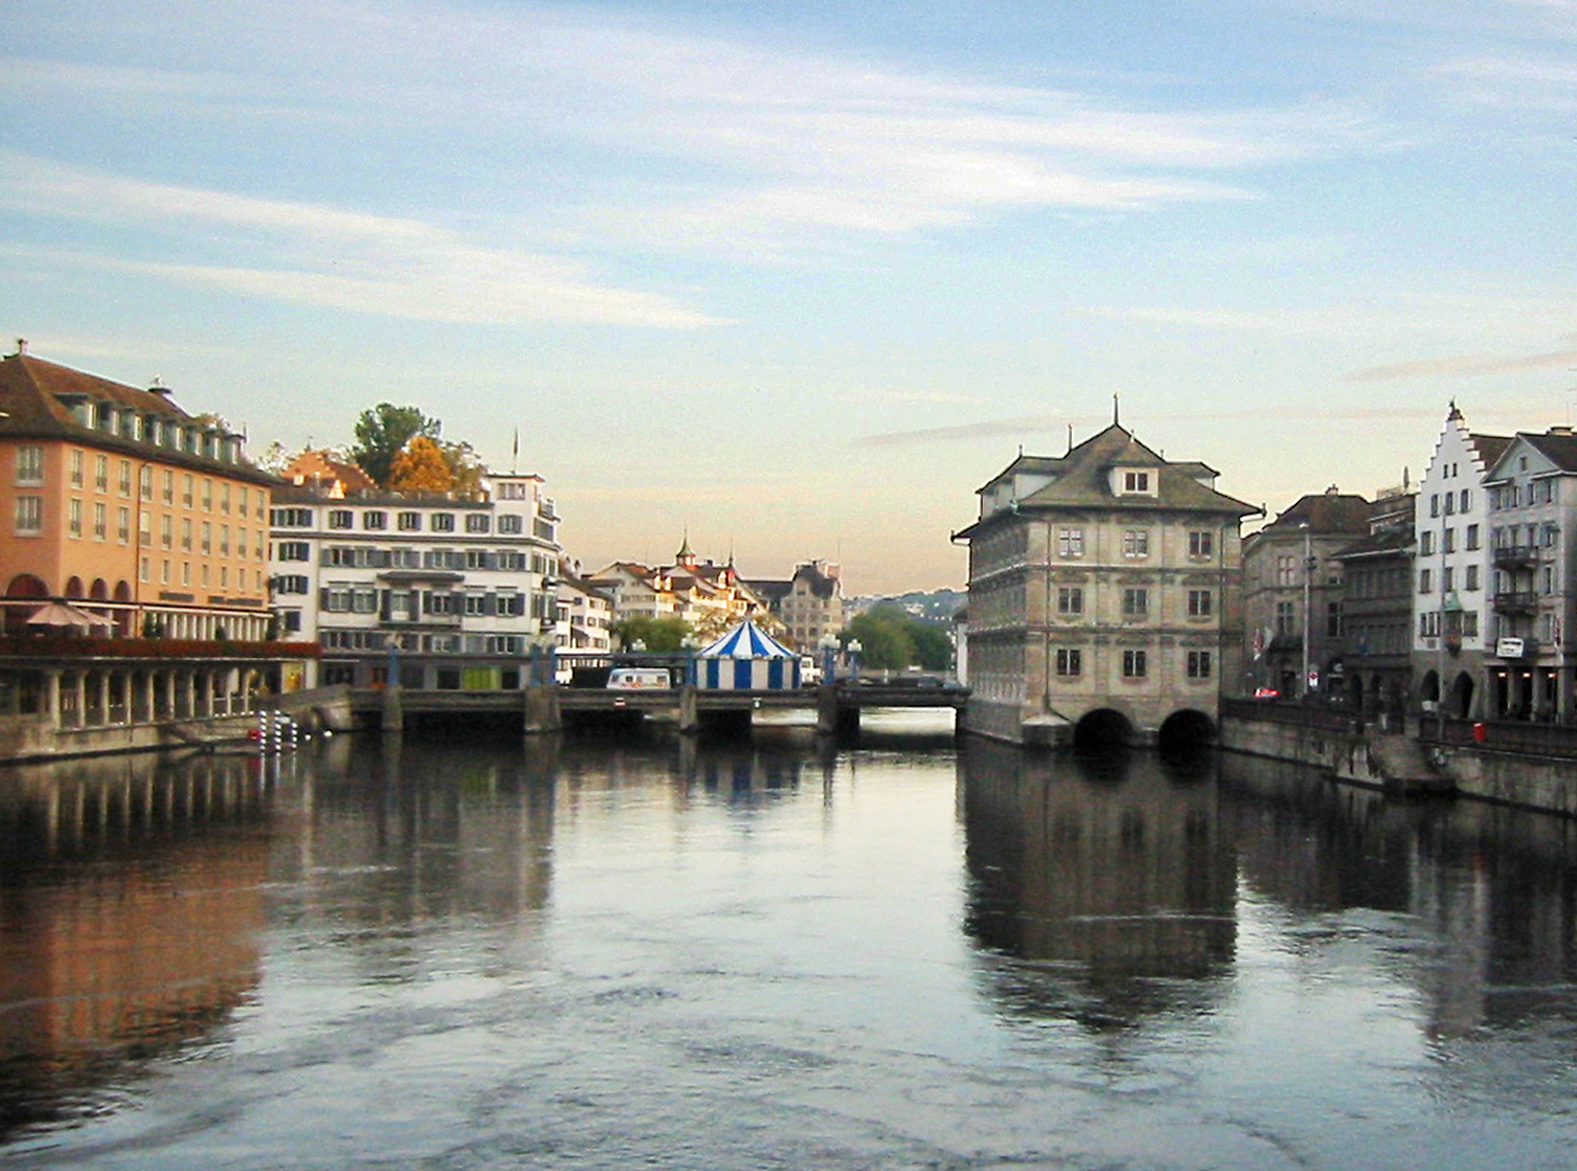 Zürich Town Hall in Limmat River. (Photo by Don Knebel)